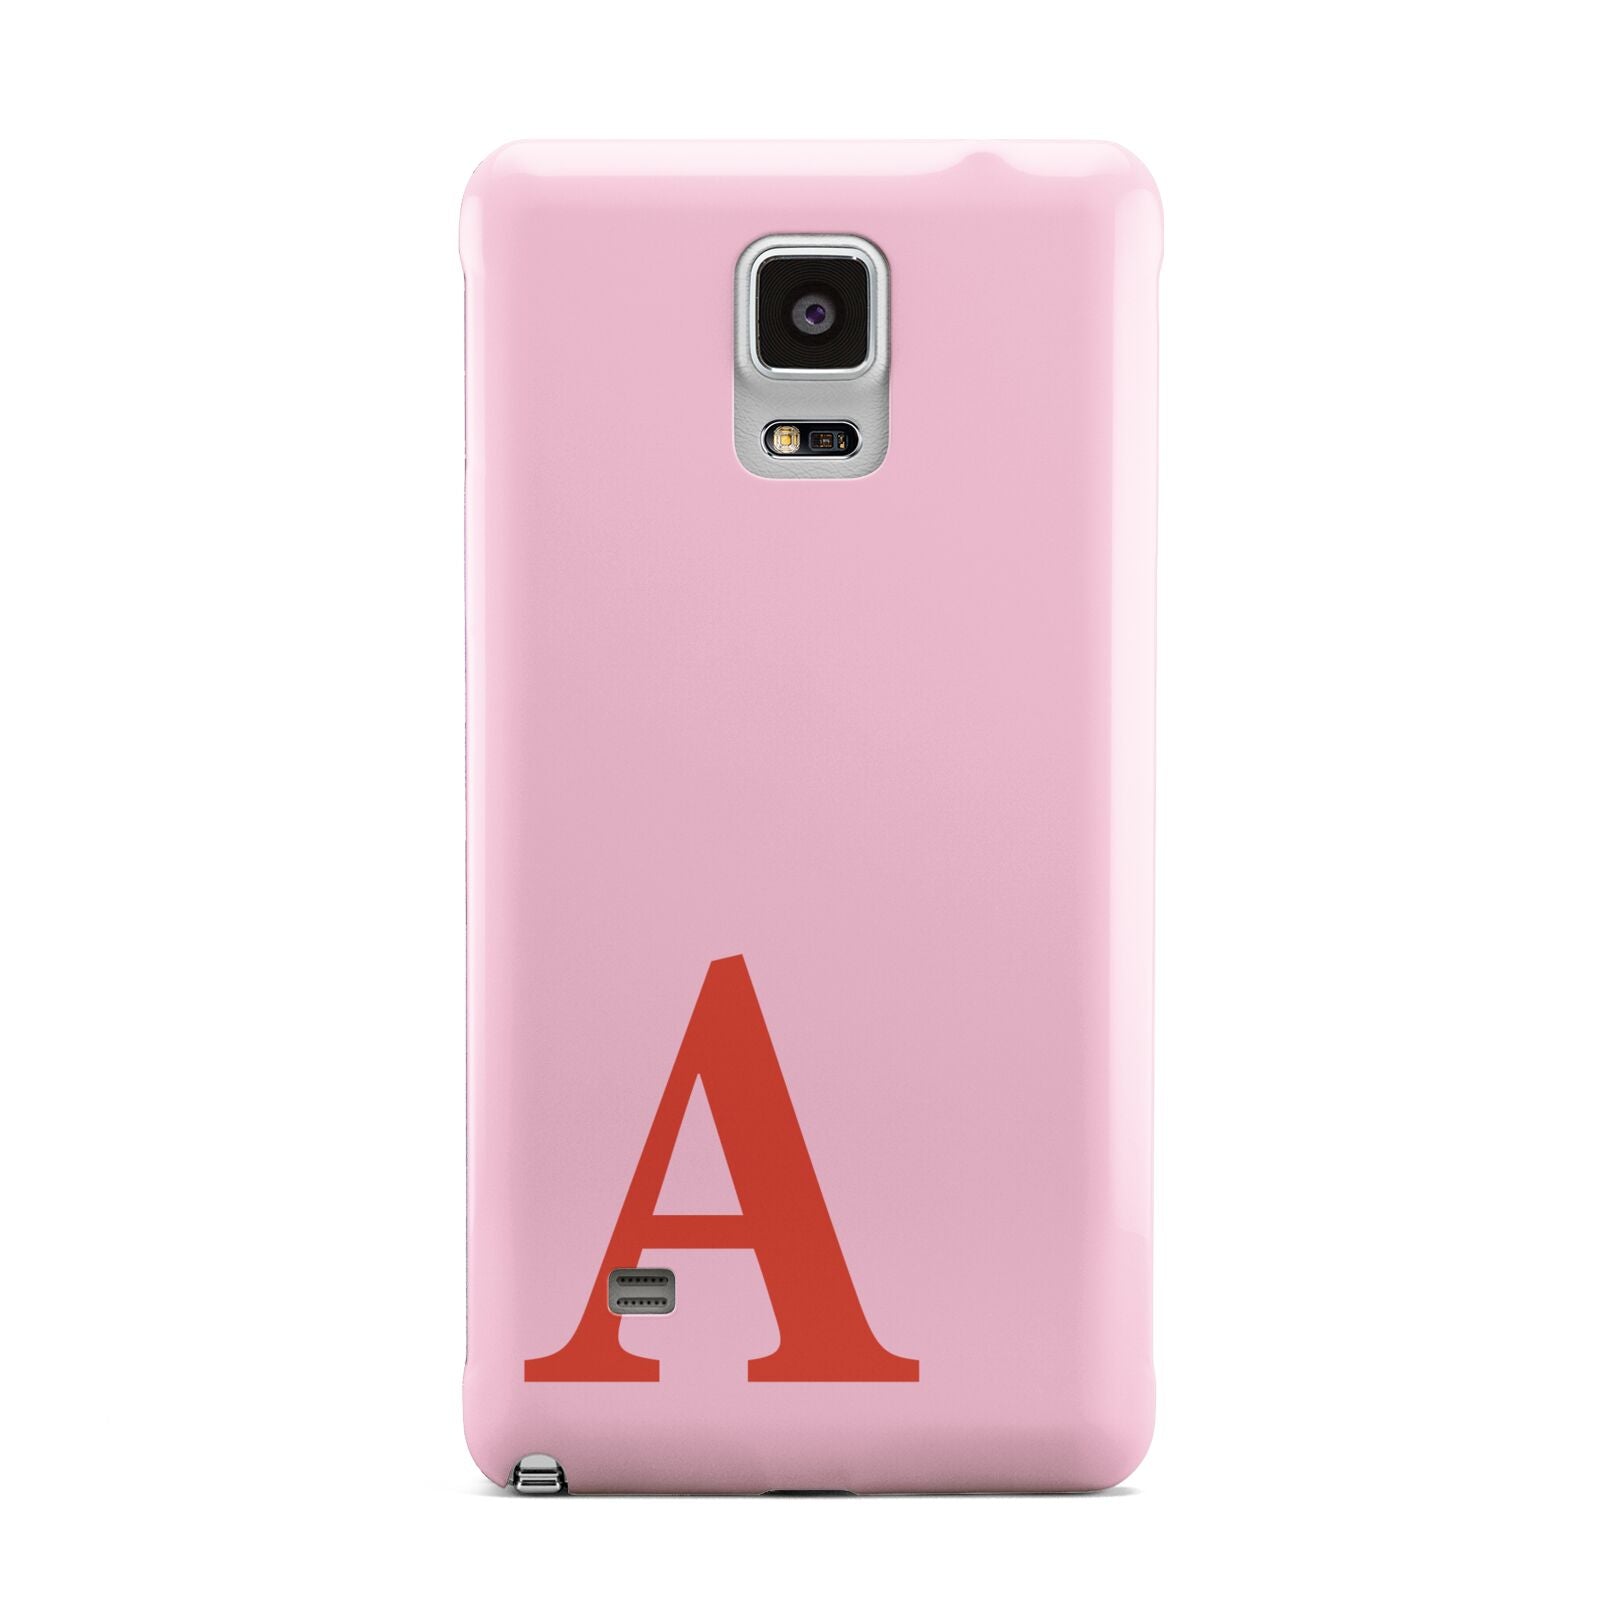 Personalised Pink and Red Samsung Galaxy Note 4 Case